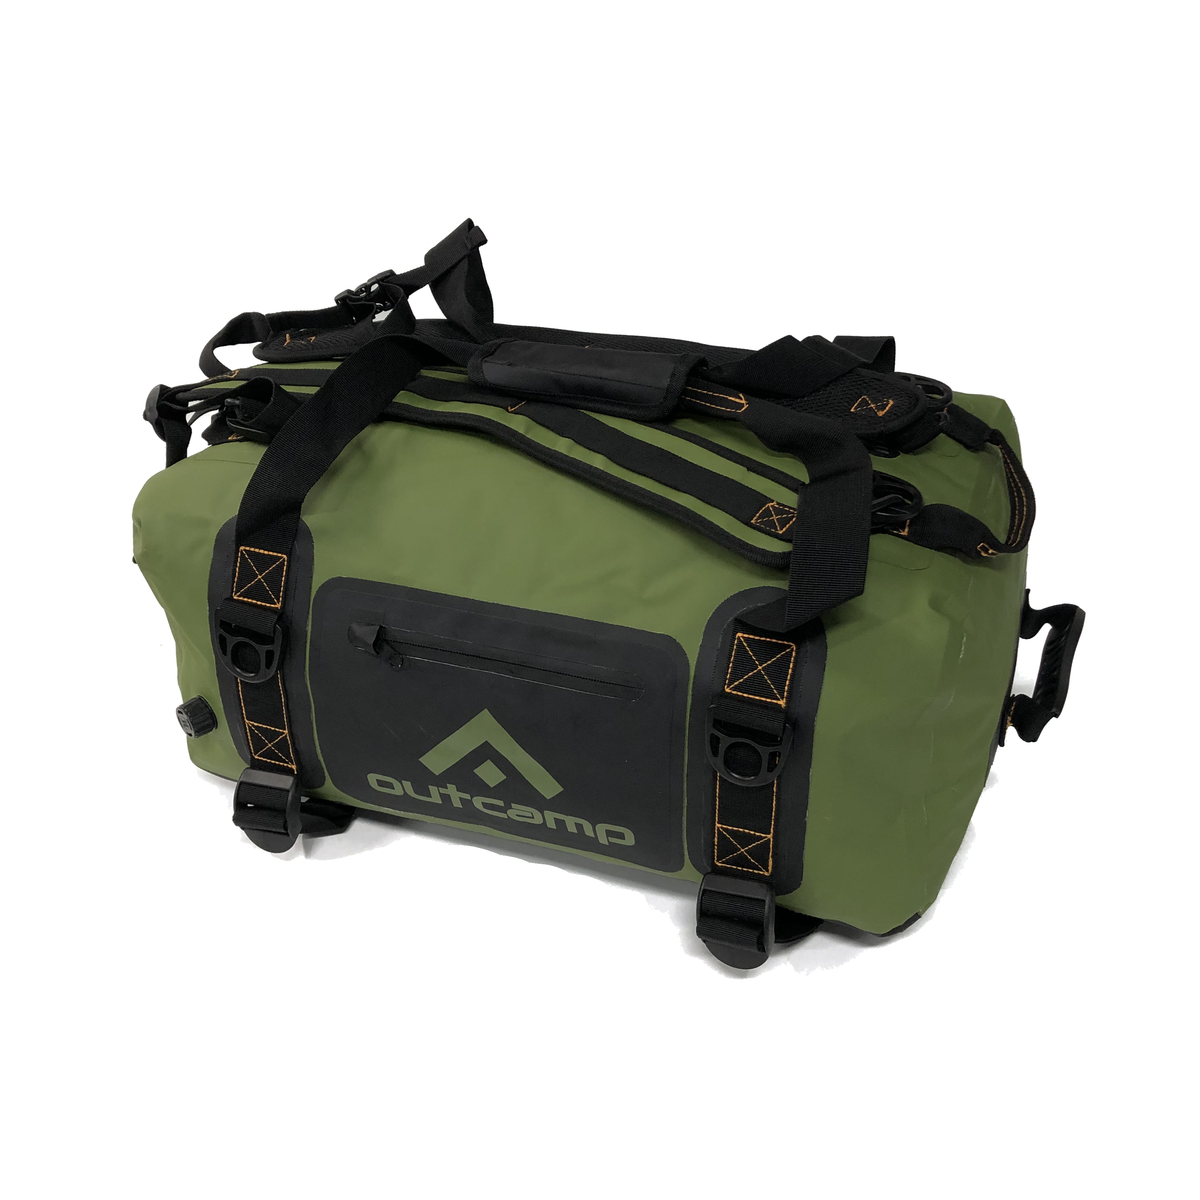 Outcamp waterproof bags for fishing and boating